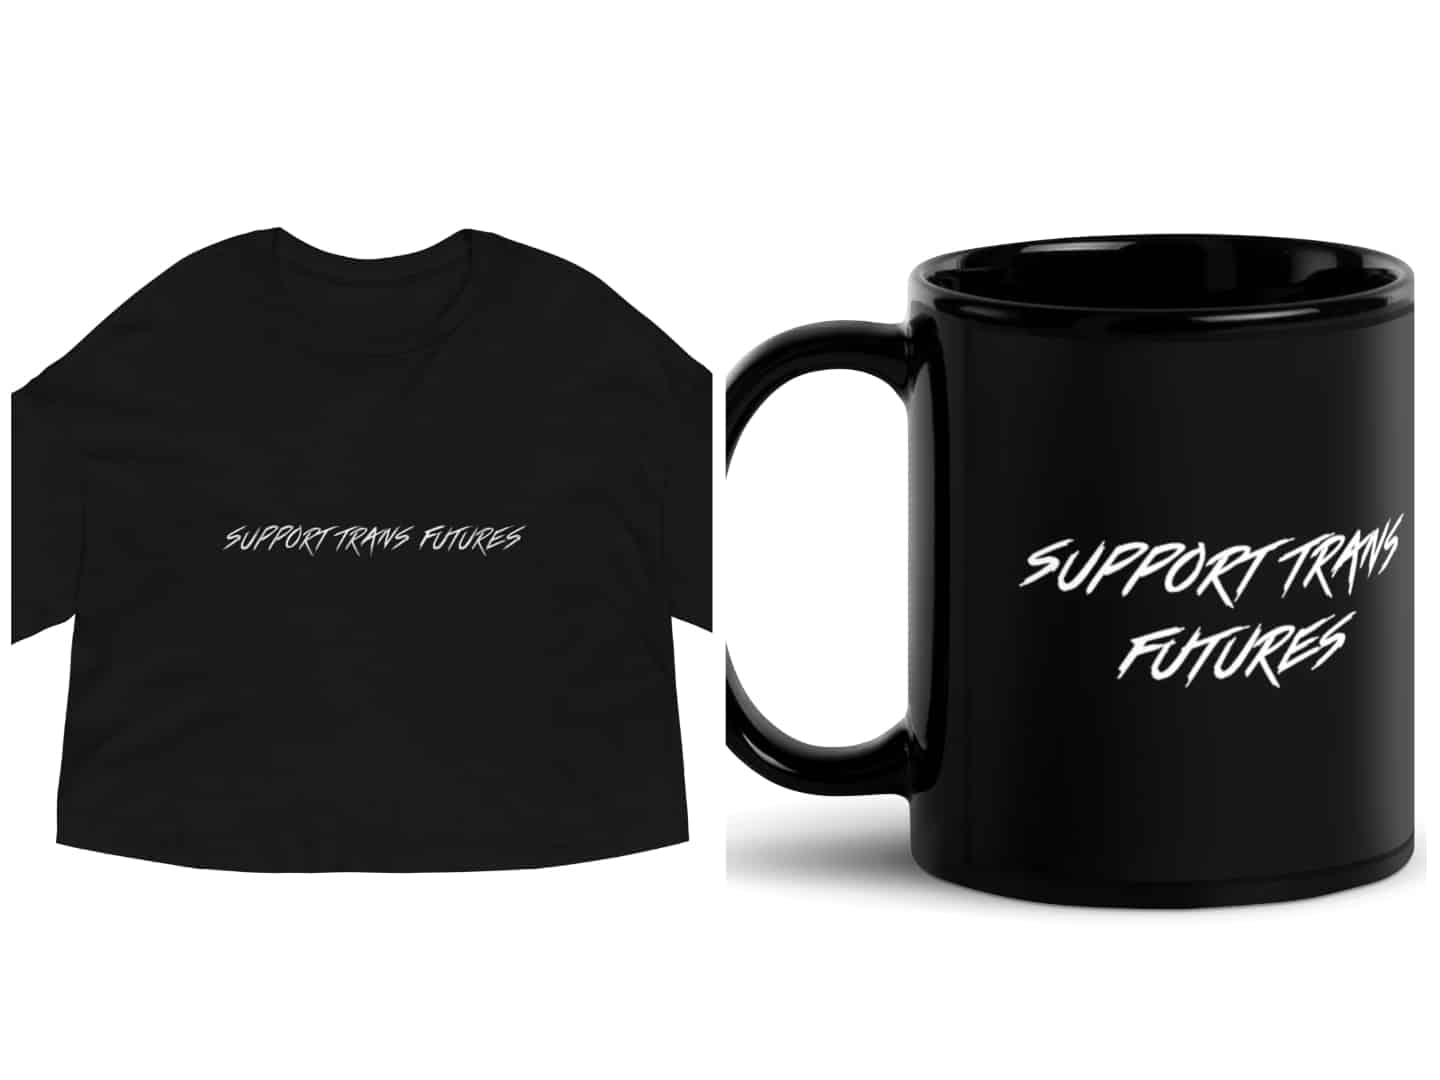 The "Support Trans Futures" collection is from gc2b, a trans-owned fashion brand.